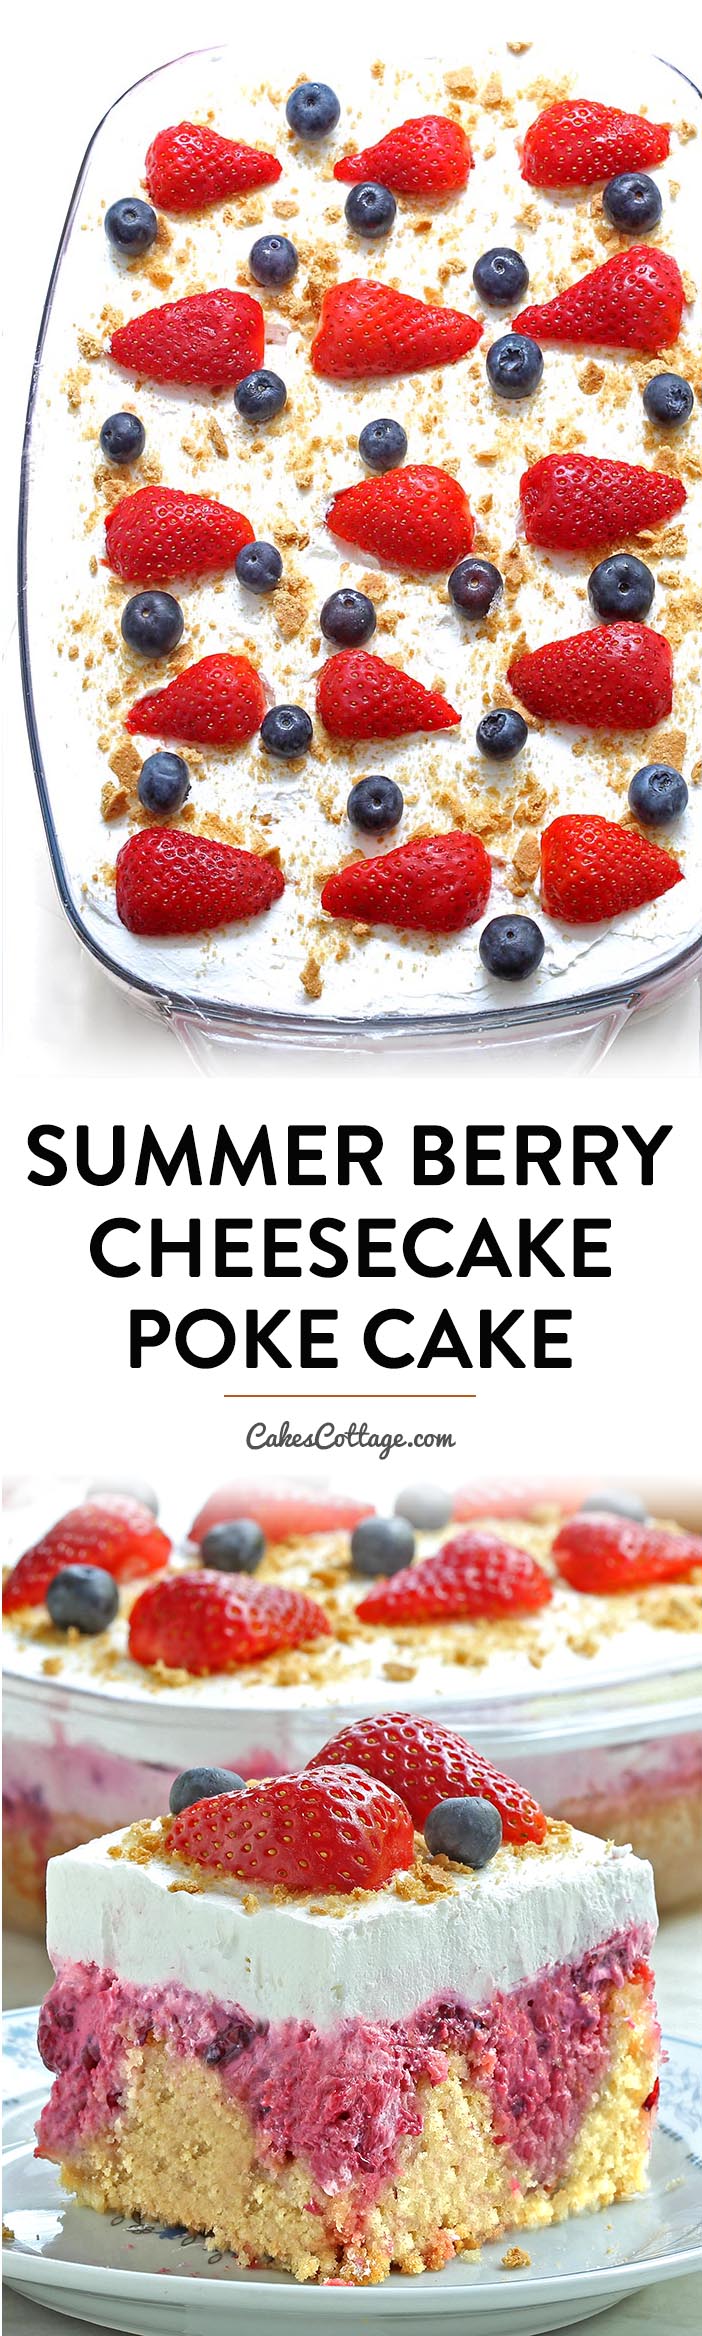 Summer Berry Cheesecake Poke Cake is a perfect red, white, and blue dessert for your Memorial Day, 4th of July BBQ’s or any family get-together…